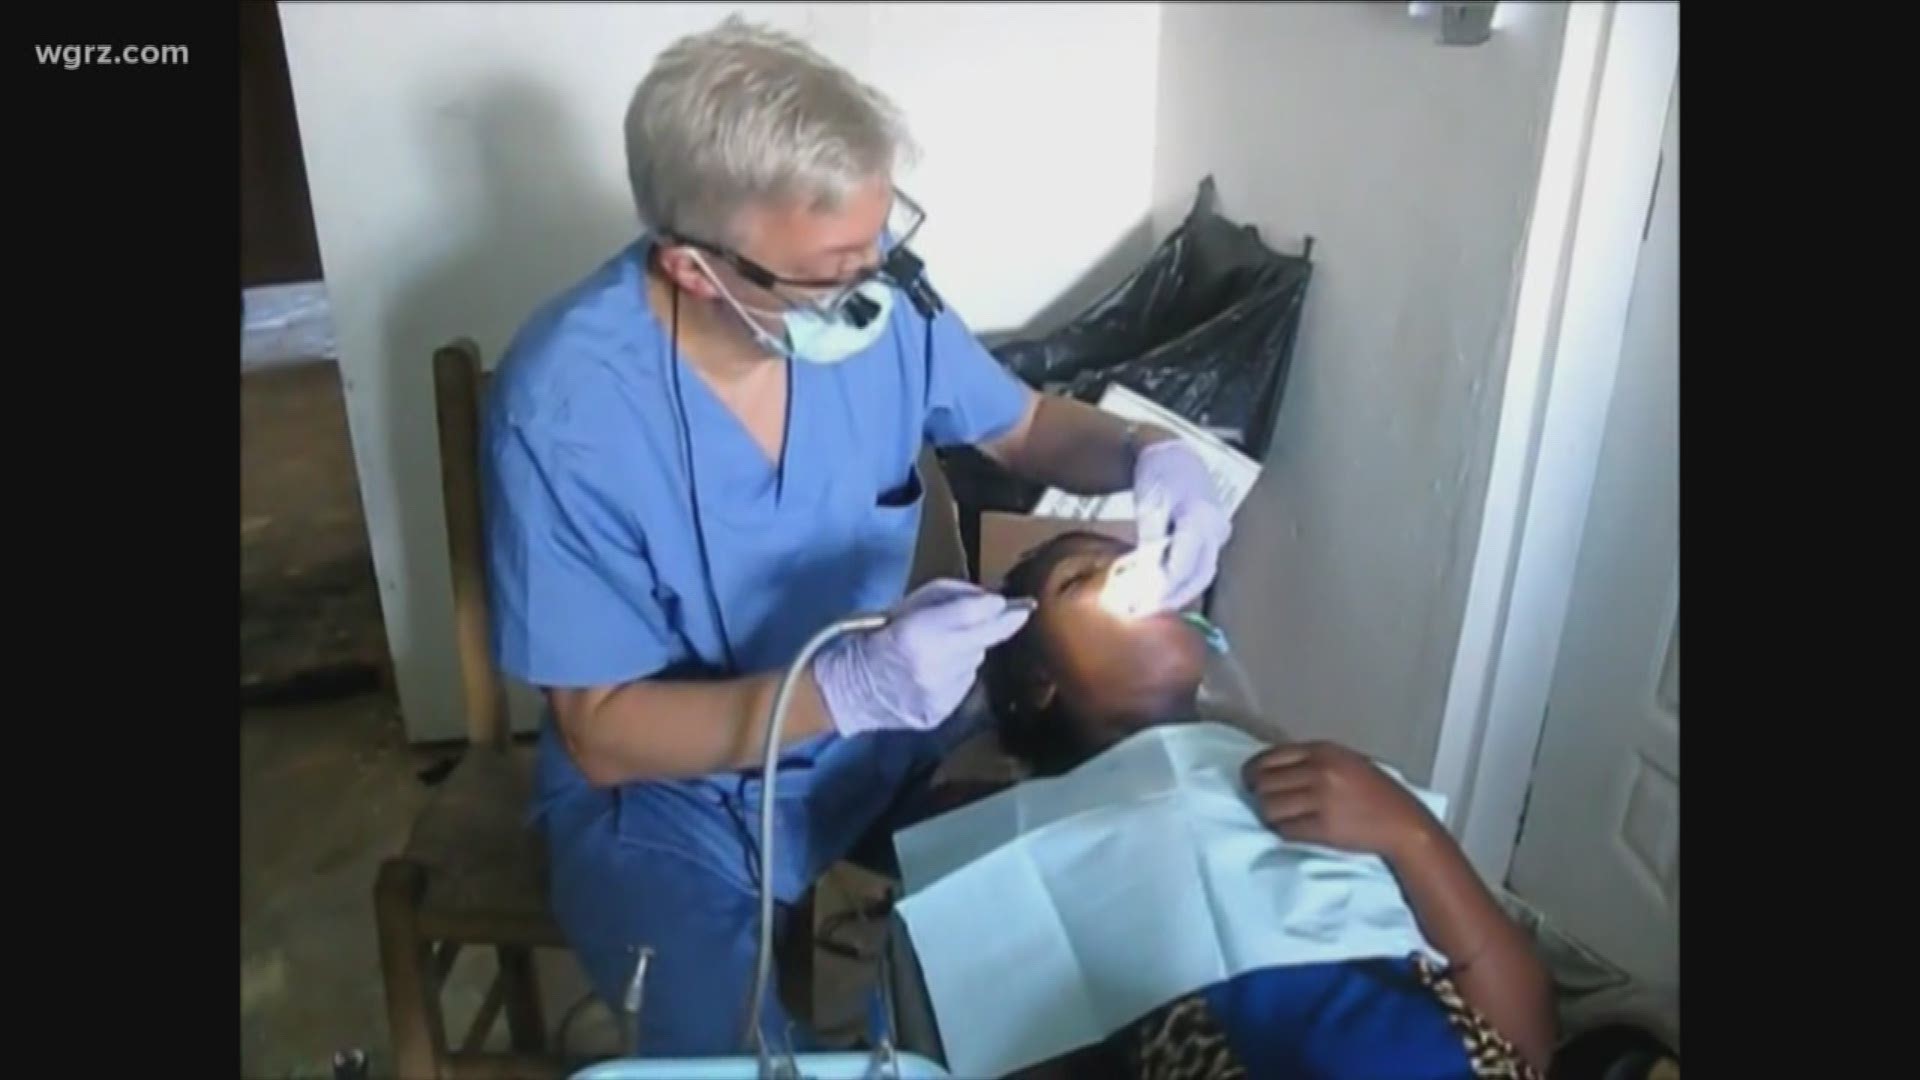 Dentistry is his profession, but for Dr. Donald Tucker he uses his skills to help those truly in need, all the way in Haiti.